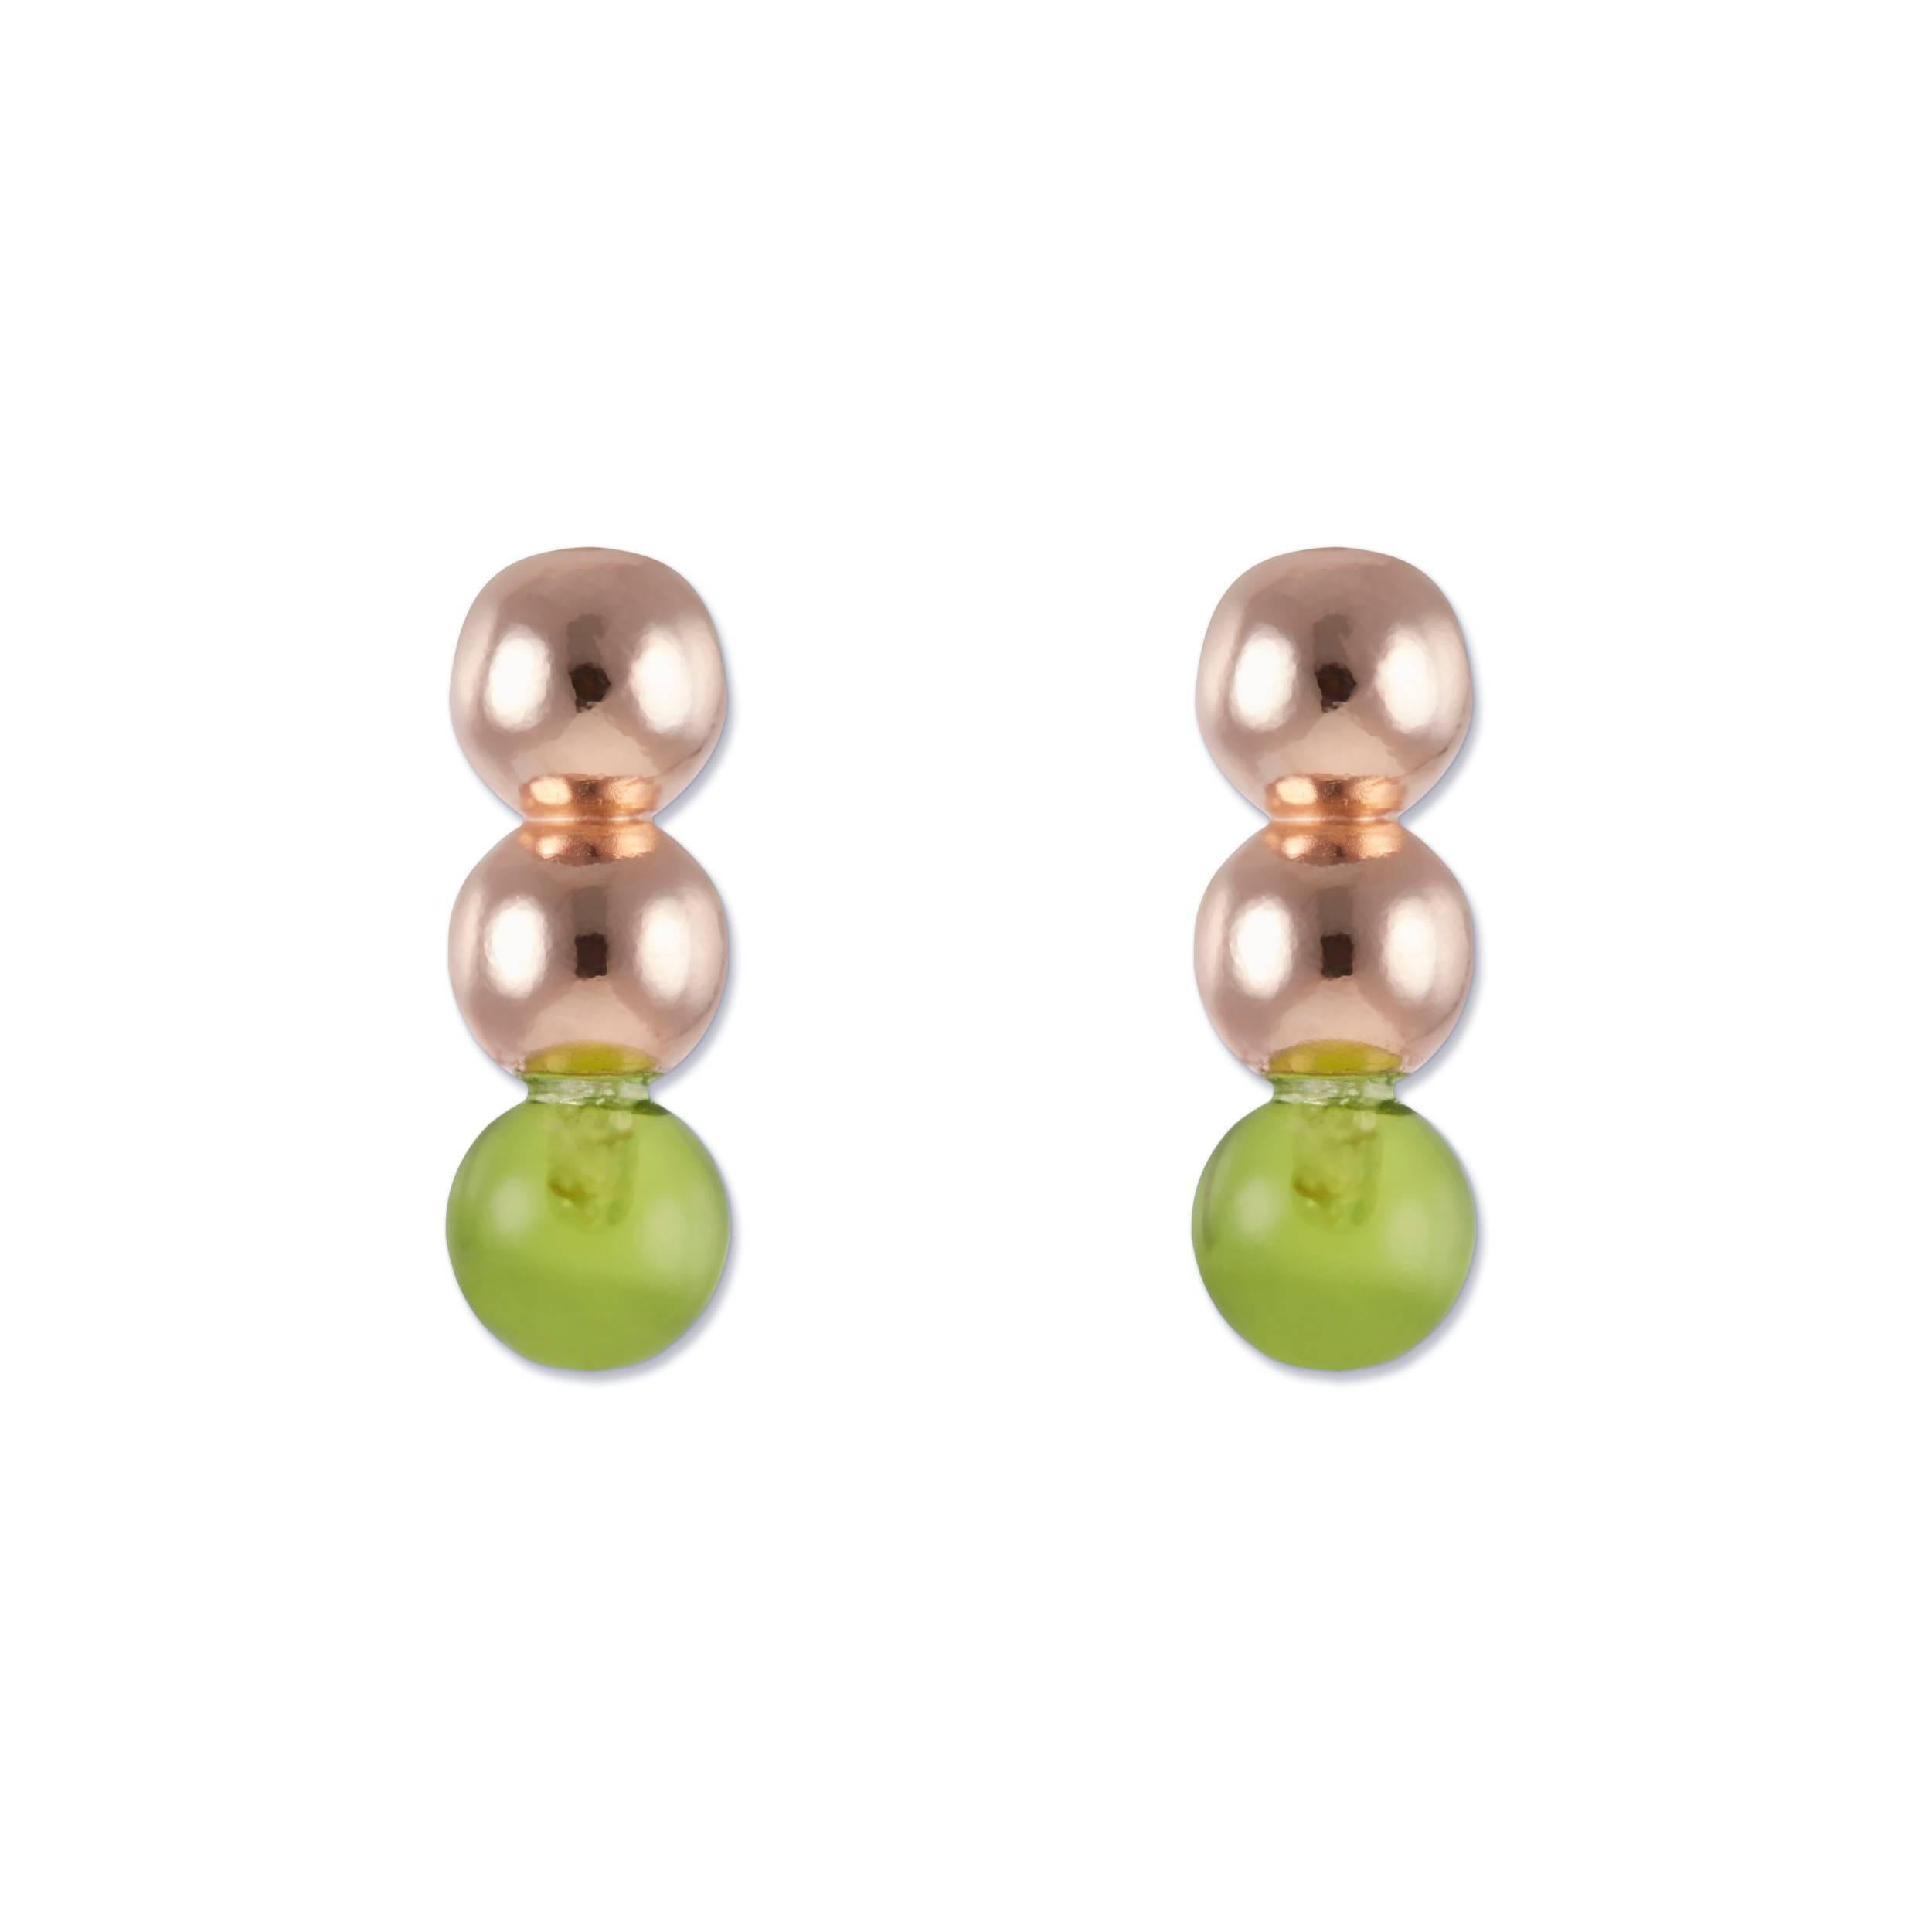 Three Ball 18 Karat Yellow Gold and Rose Gold Vermeil Stud in Green Earrings 4